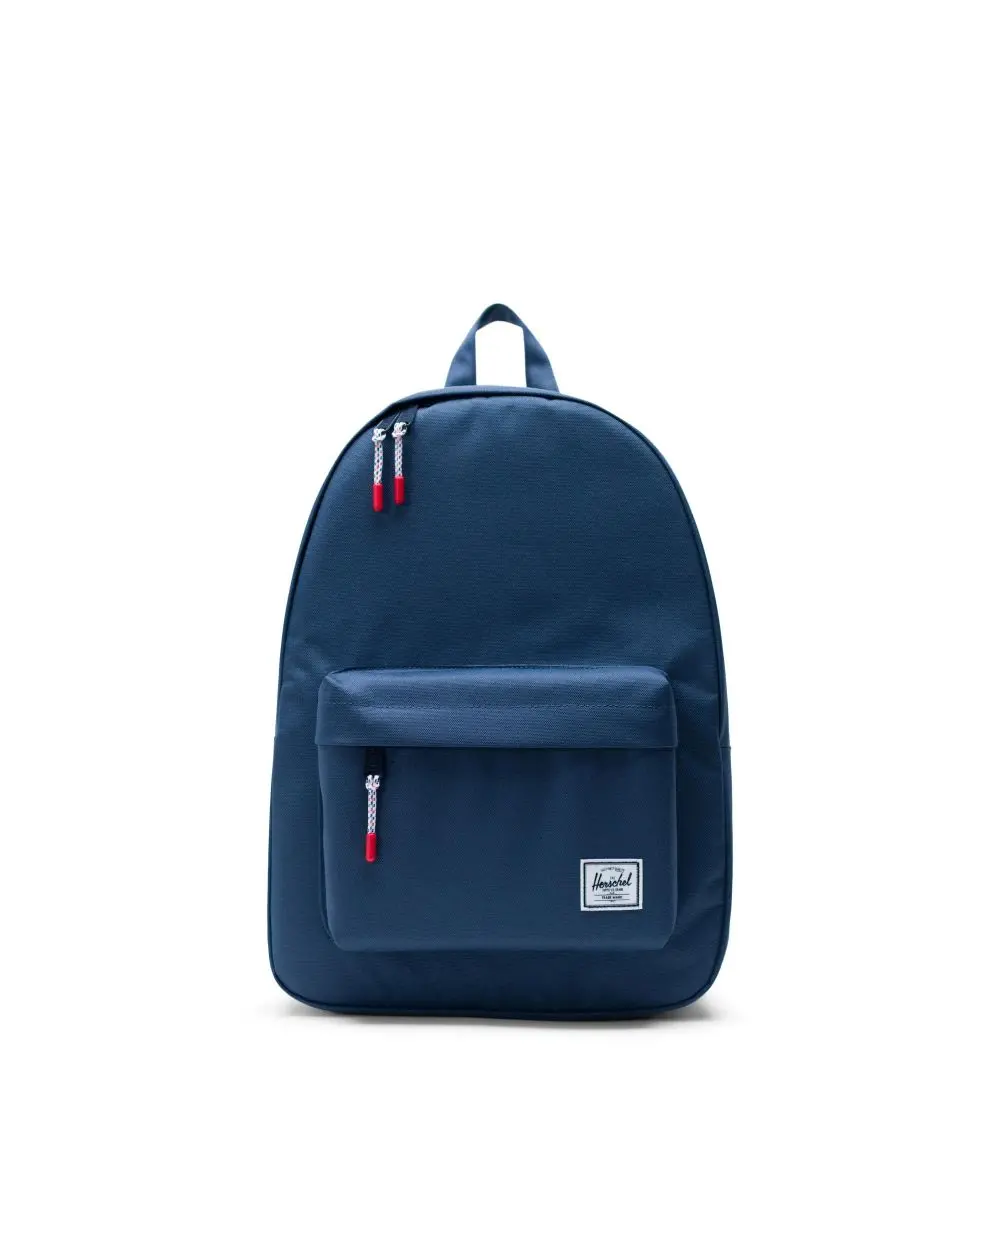 Herschel Classic Backpack without laptop compartment